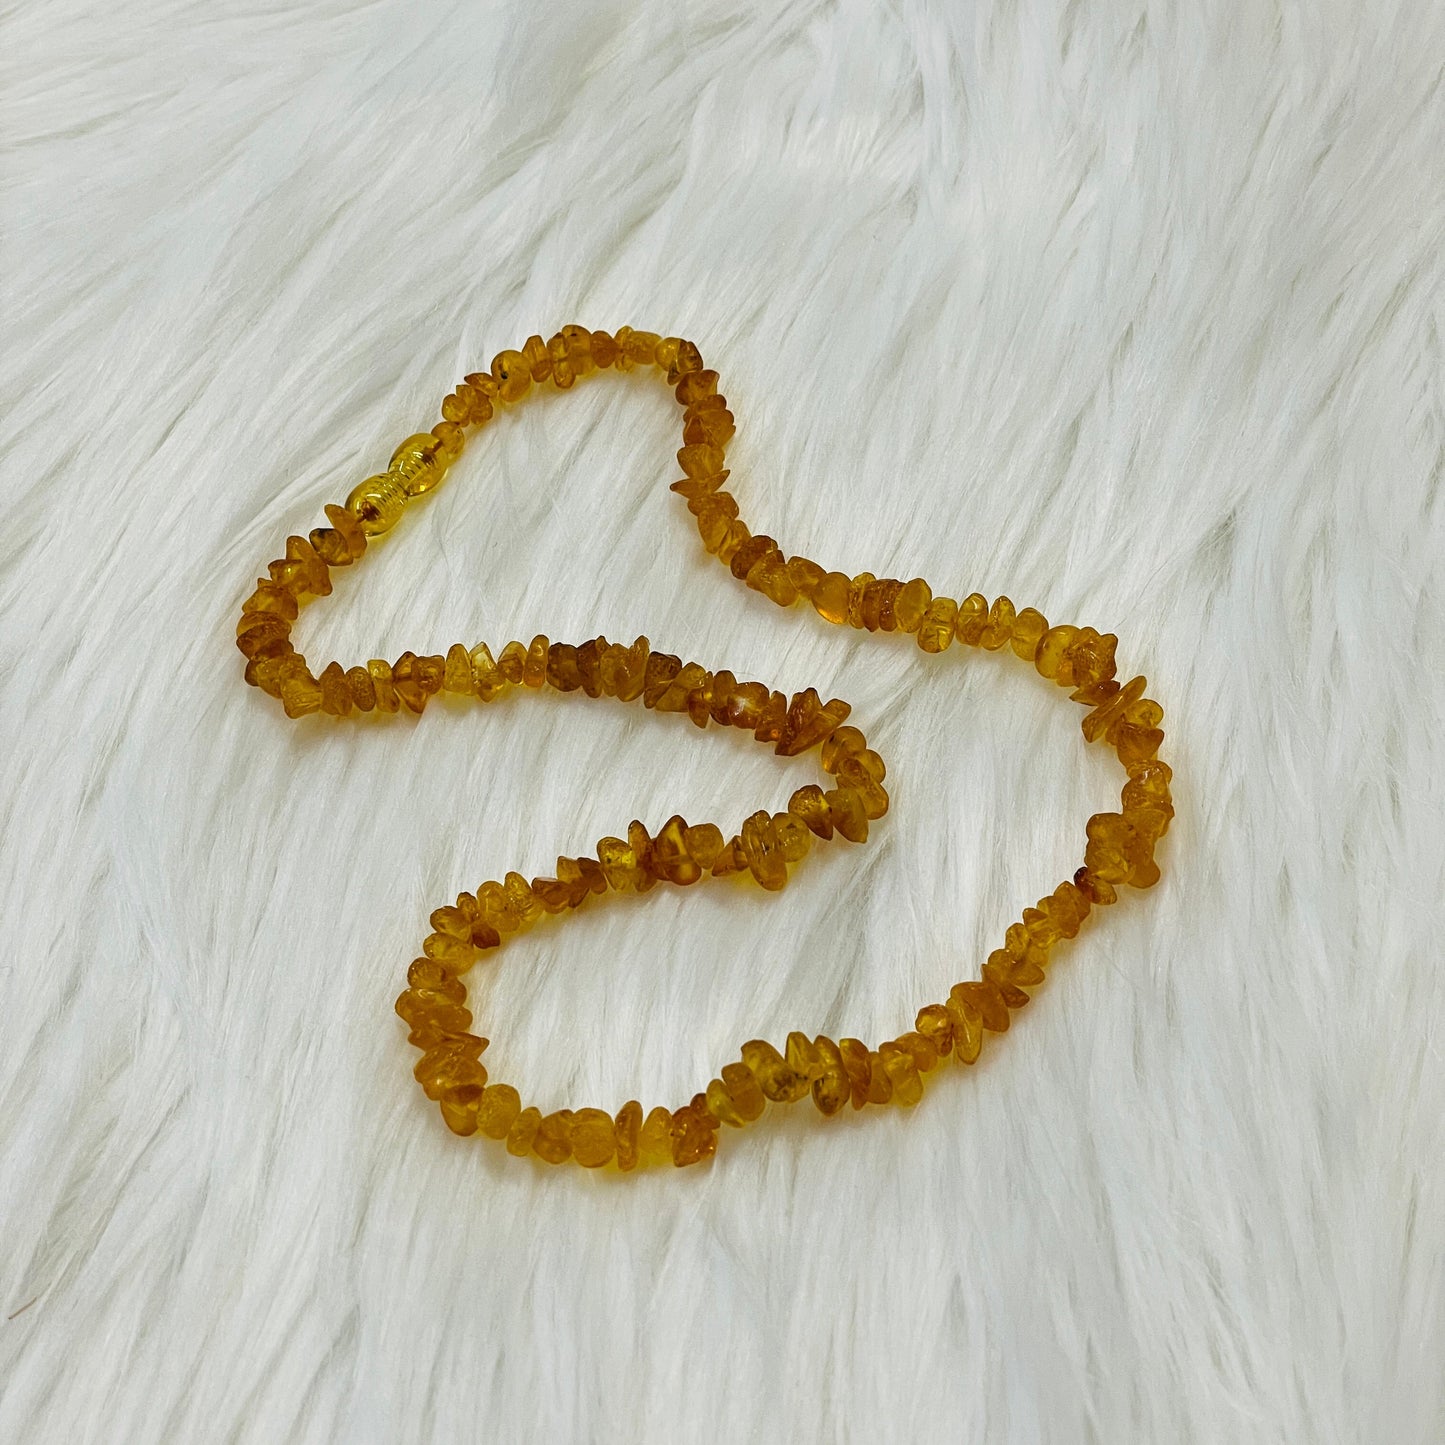 Authentic Lithuanian Baltic Amber Lightly Polished Honey Necklace - 17.5"